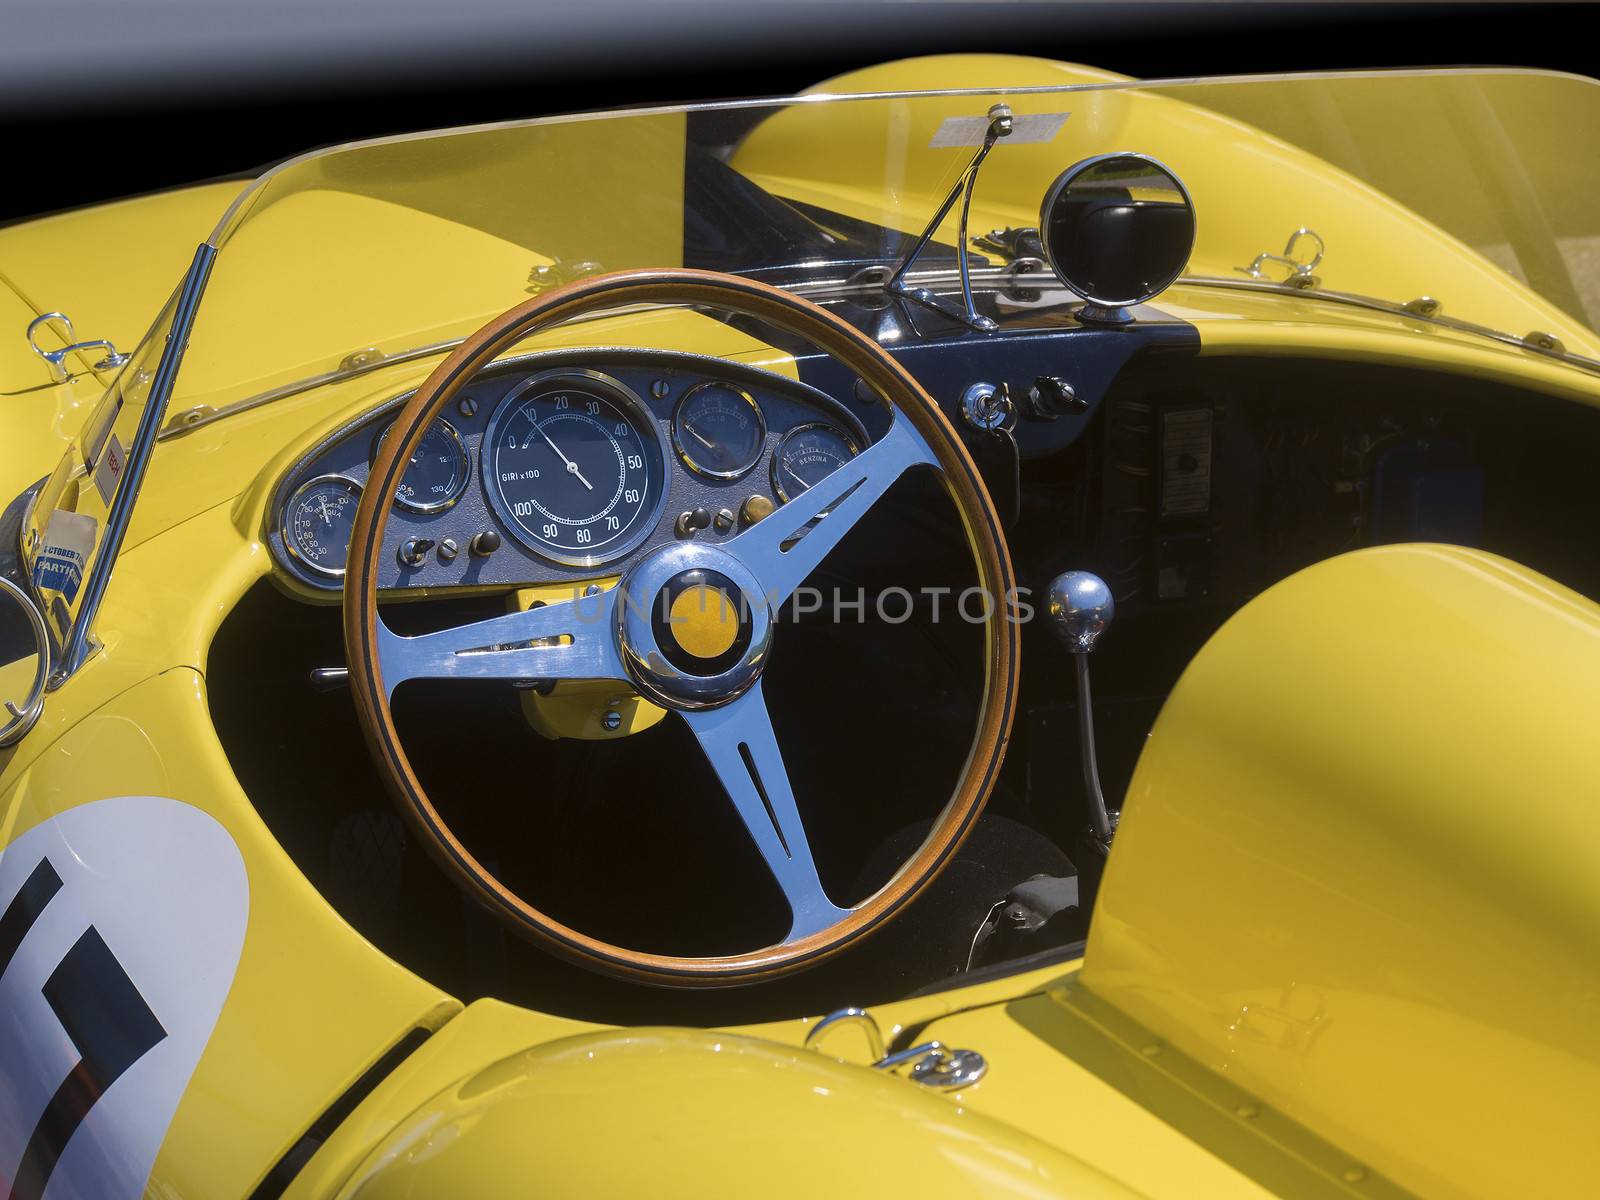 Race car dashboard and cockpit in yellow